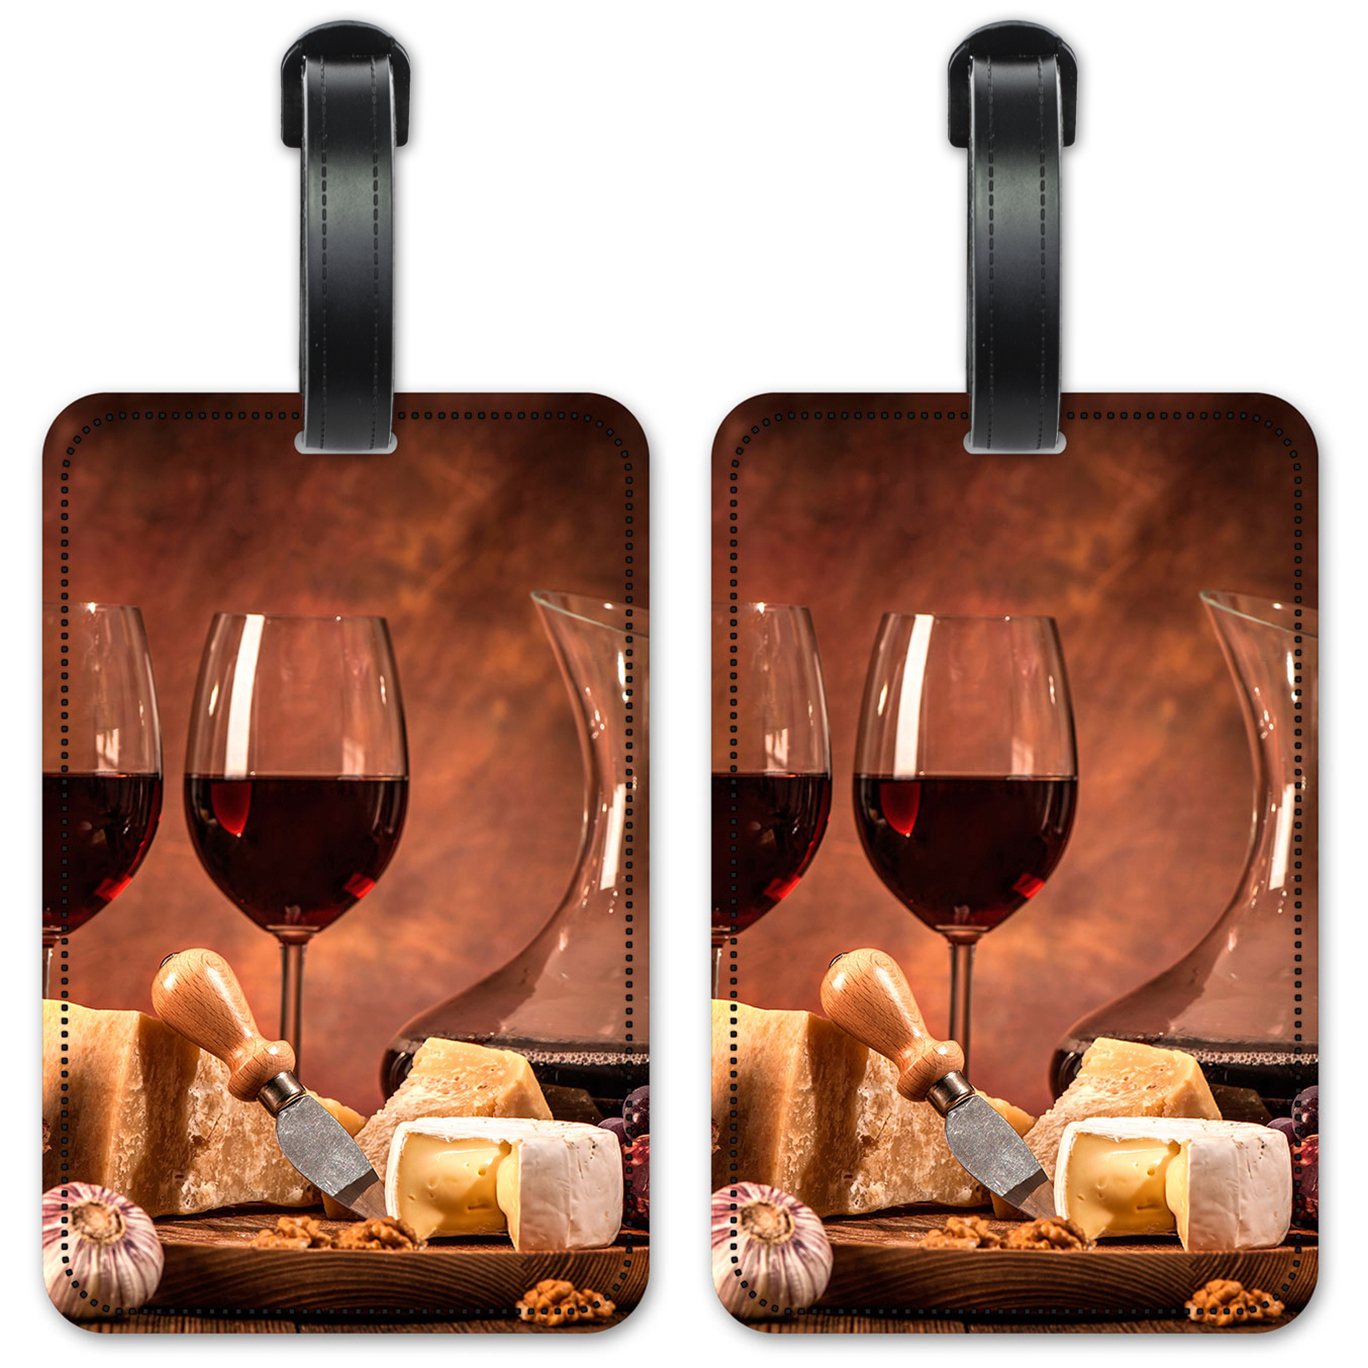 Red Wine, Meat & Cheese - #3131